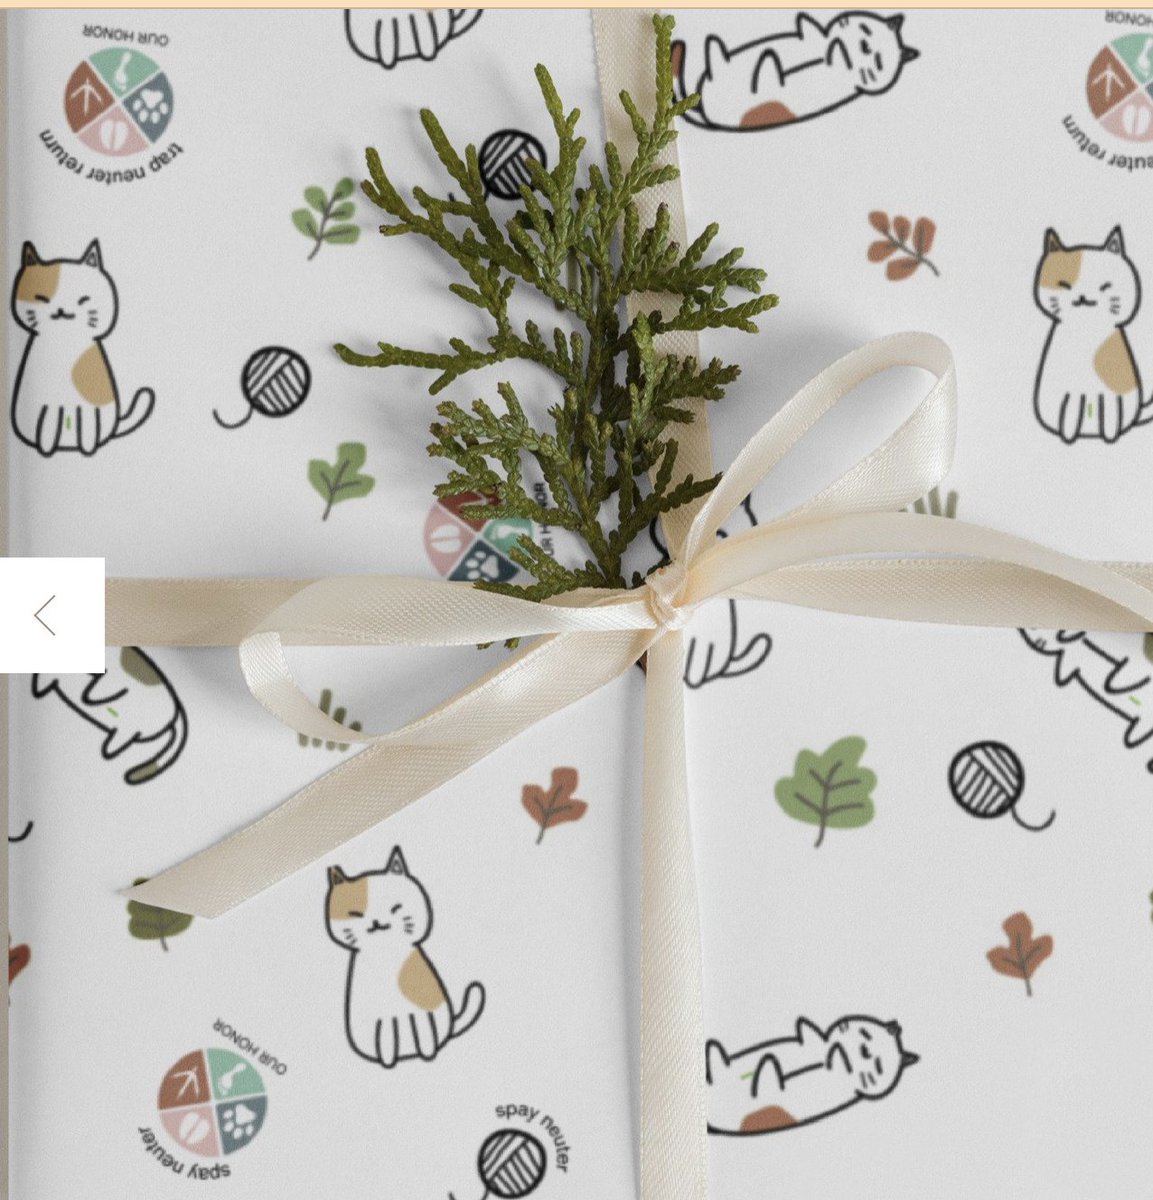 I'm really excited about our new kitty TNR gift wrap paper. Complete with green tattoo and ear tip. Stock up for the holidays! 

#tnr #rescuecats #catsoftwitter #catrescue #vetmed #vettwitter #veterinarymedicine #vetstudent #veterinarystudent #sheltermedicine #veterinarymedicine